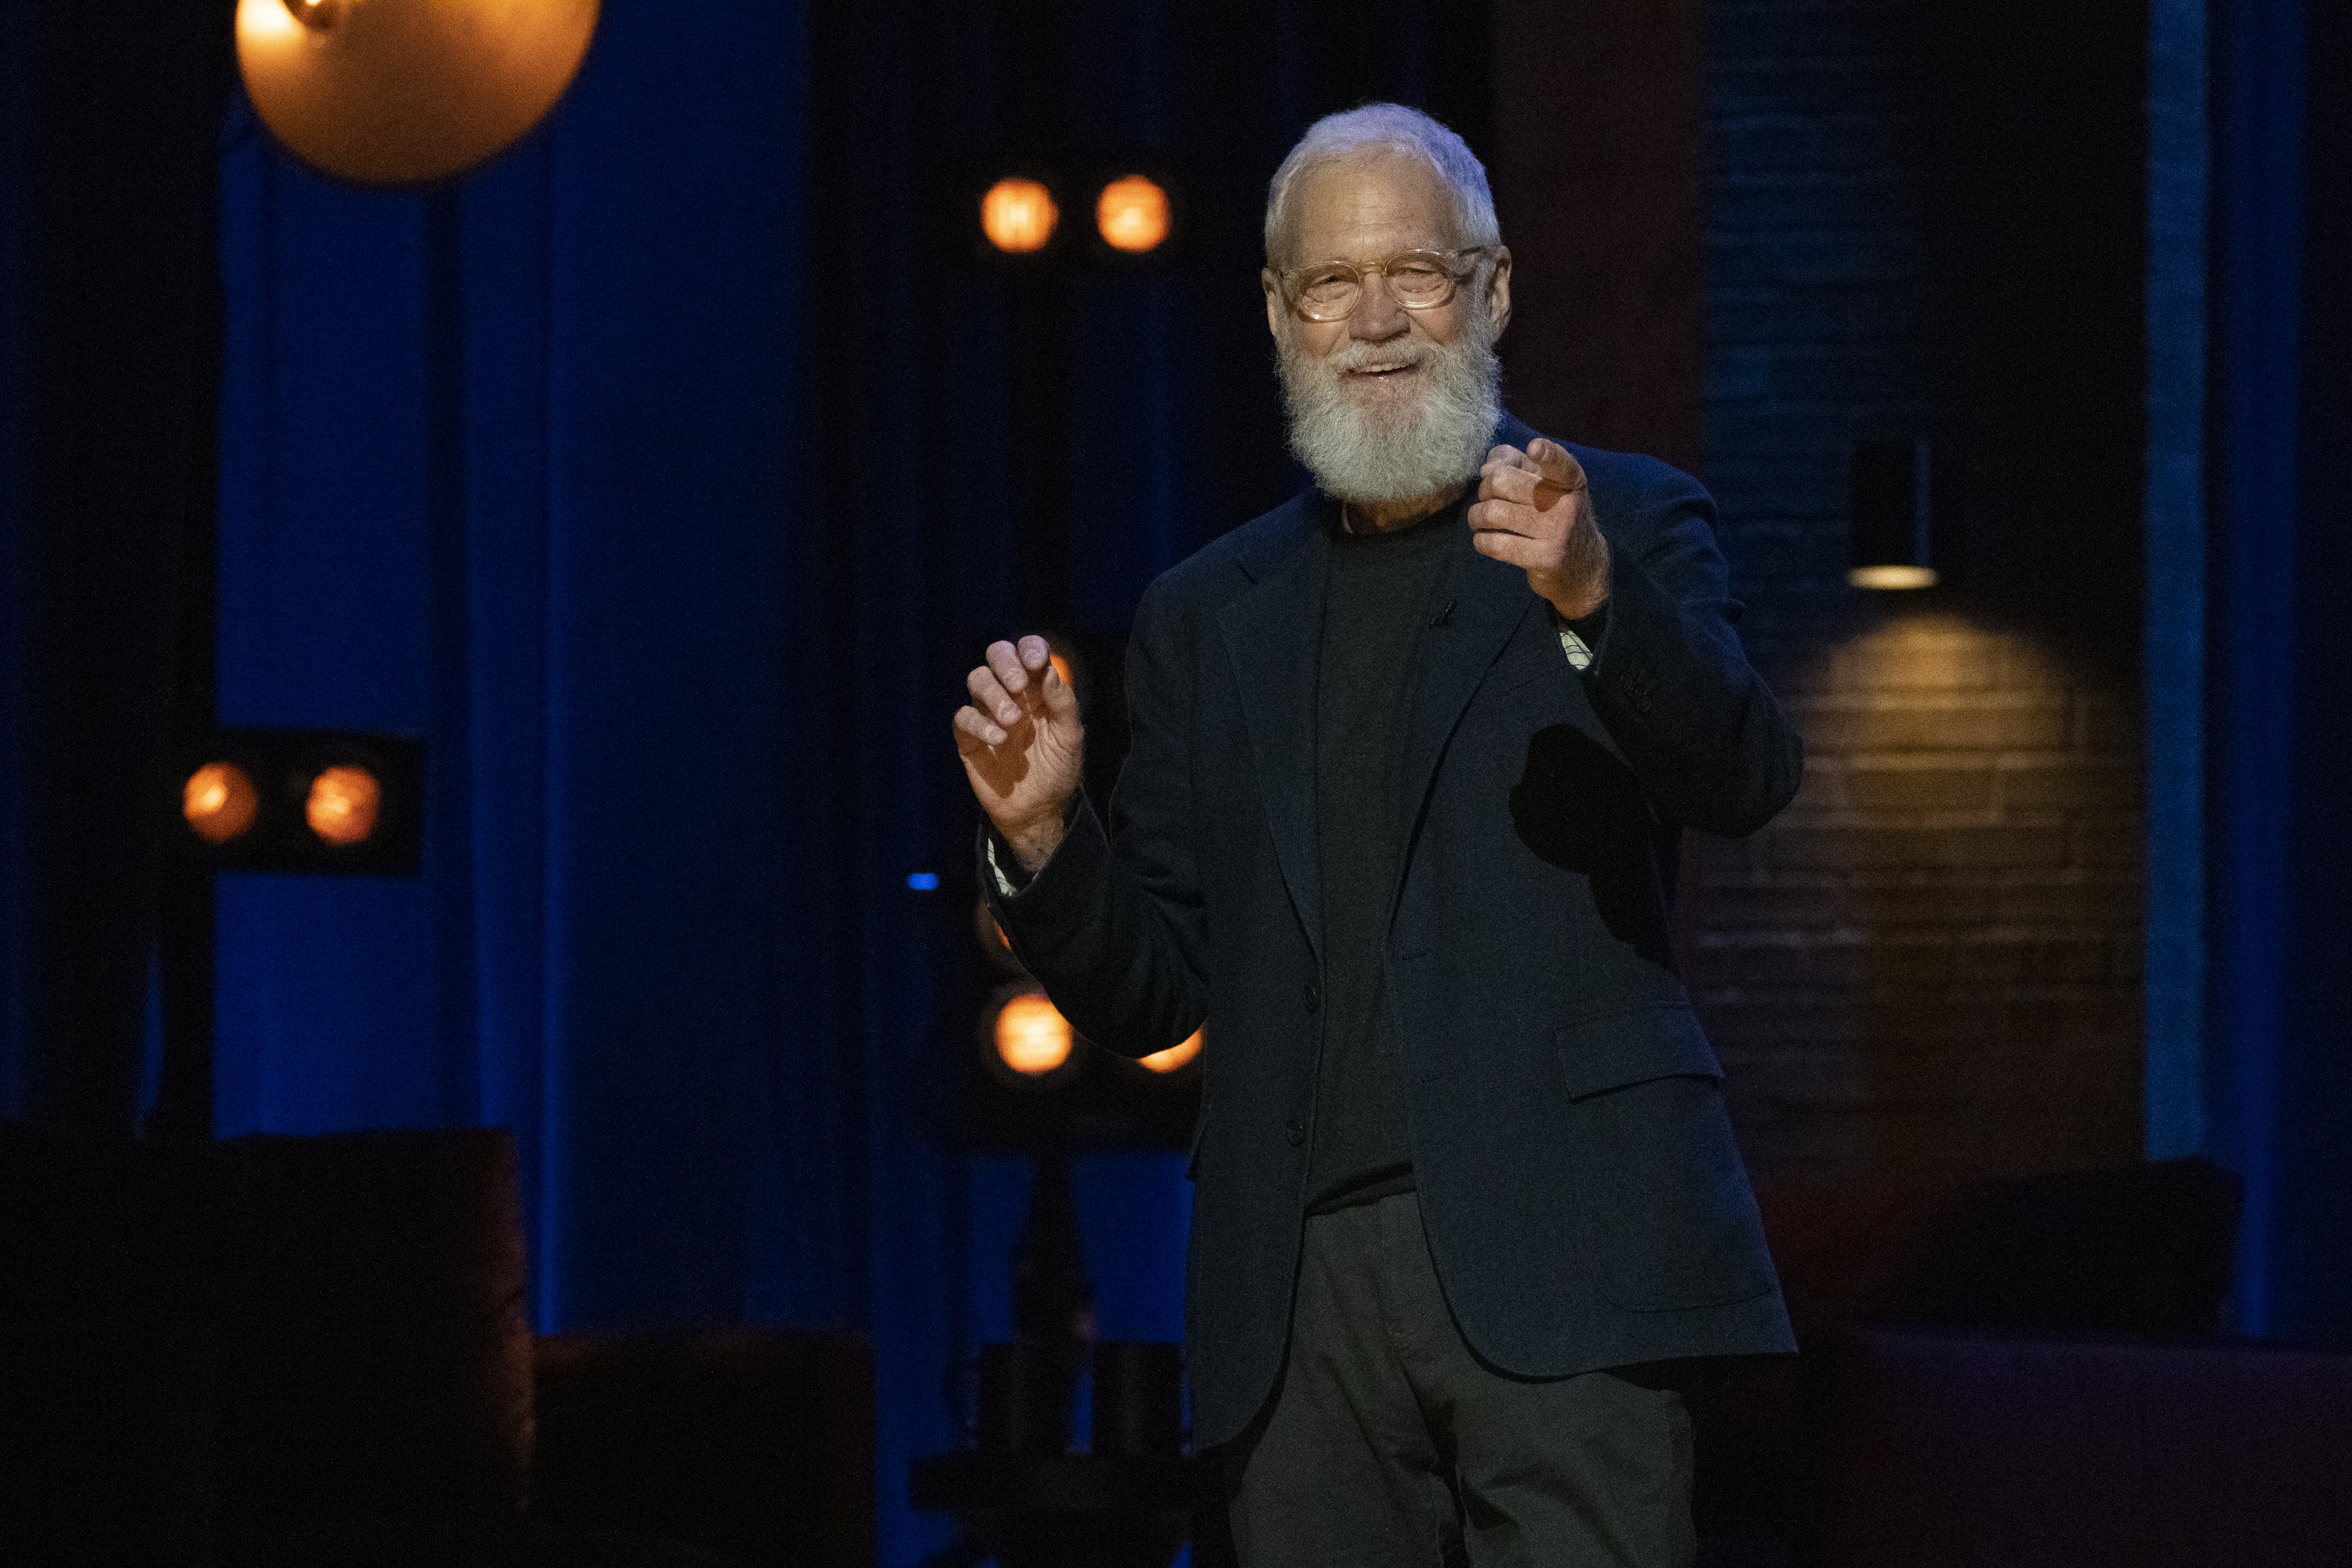 DAVID LETTERMAN PERFORMING AT NETFLIX IS A JOKE: THE FESTIVAL